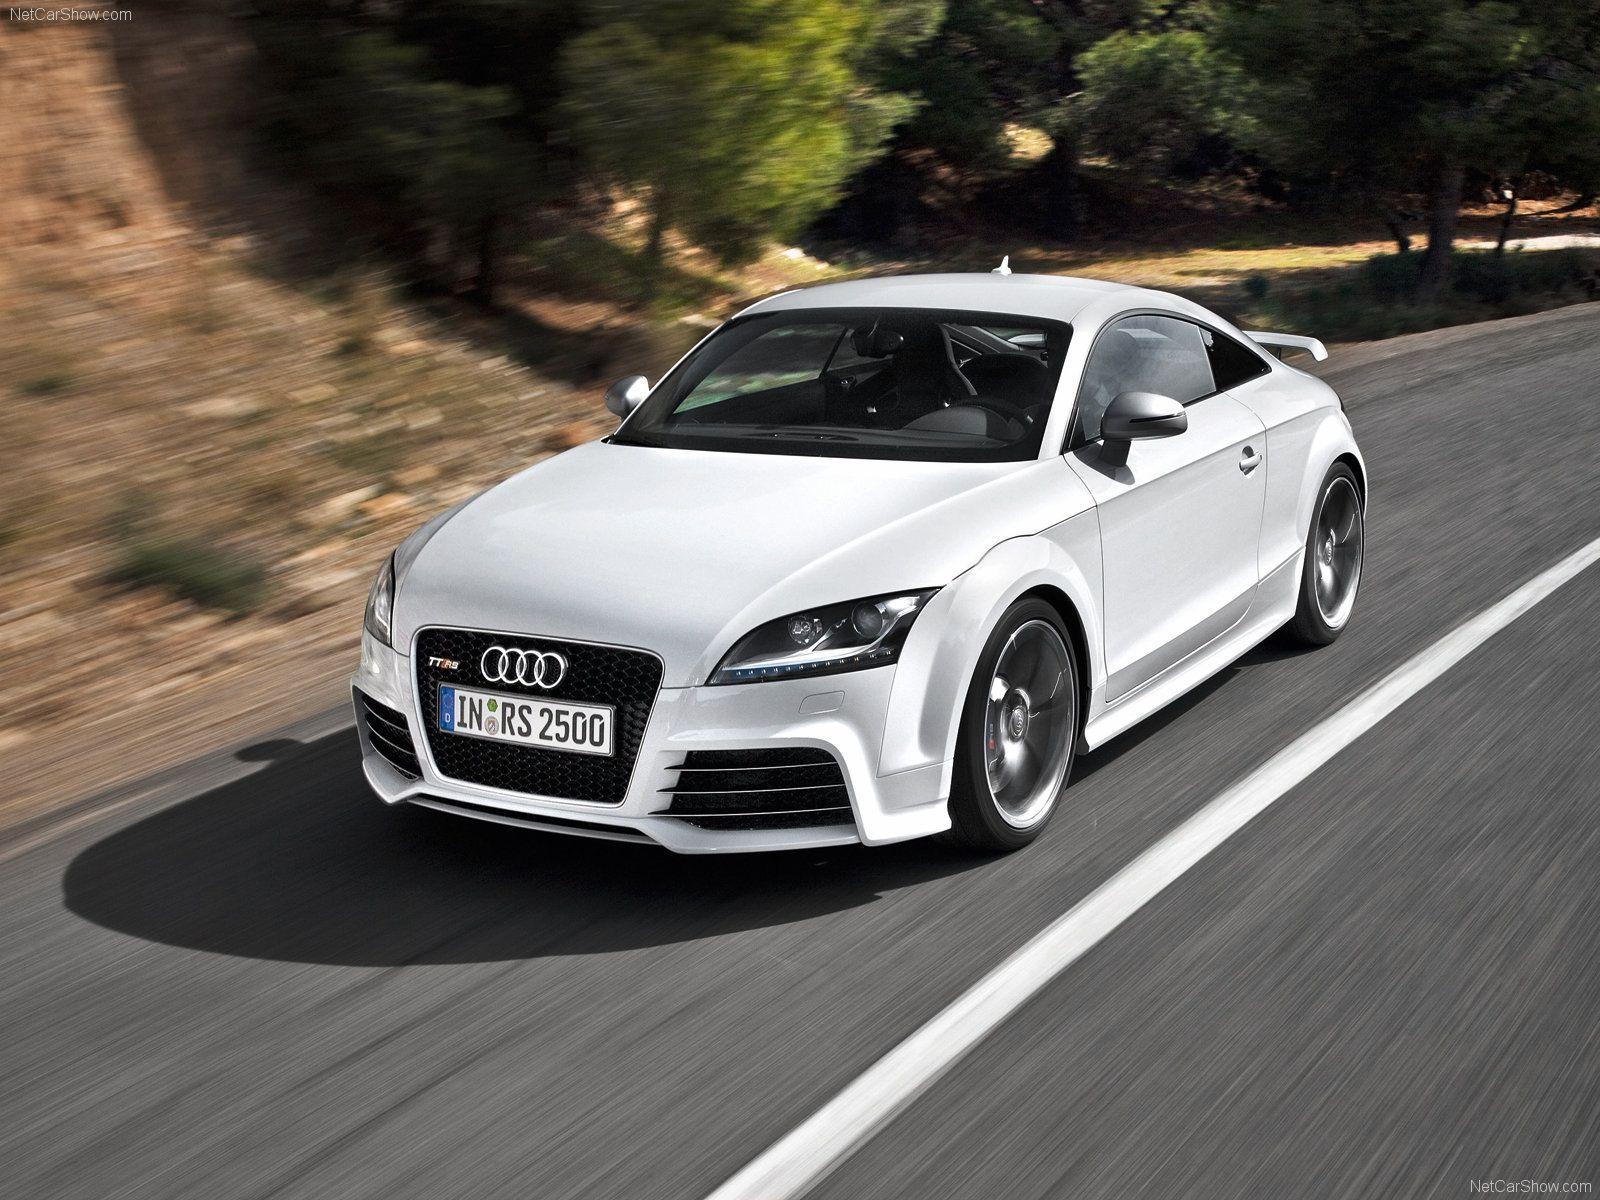 Audi TT RS picture # 64381. Audi photo gallery